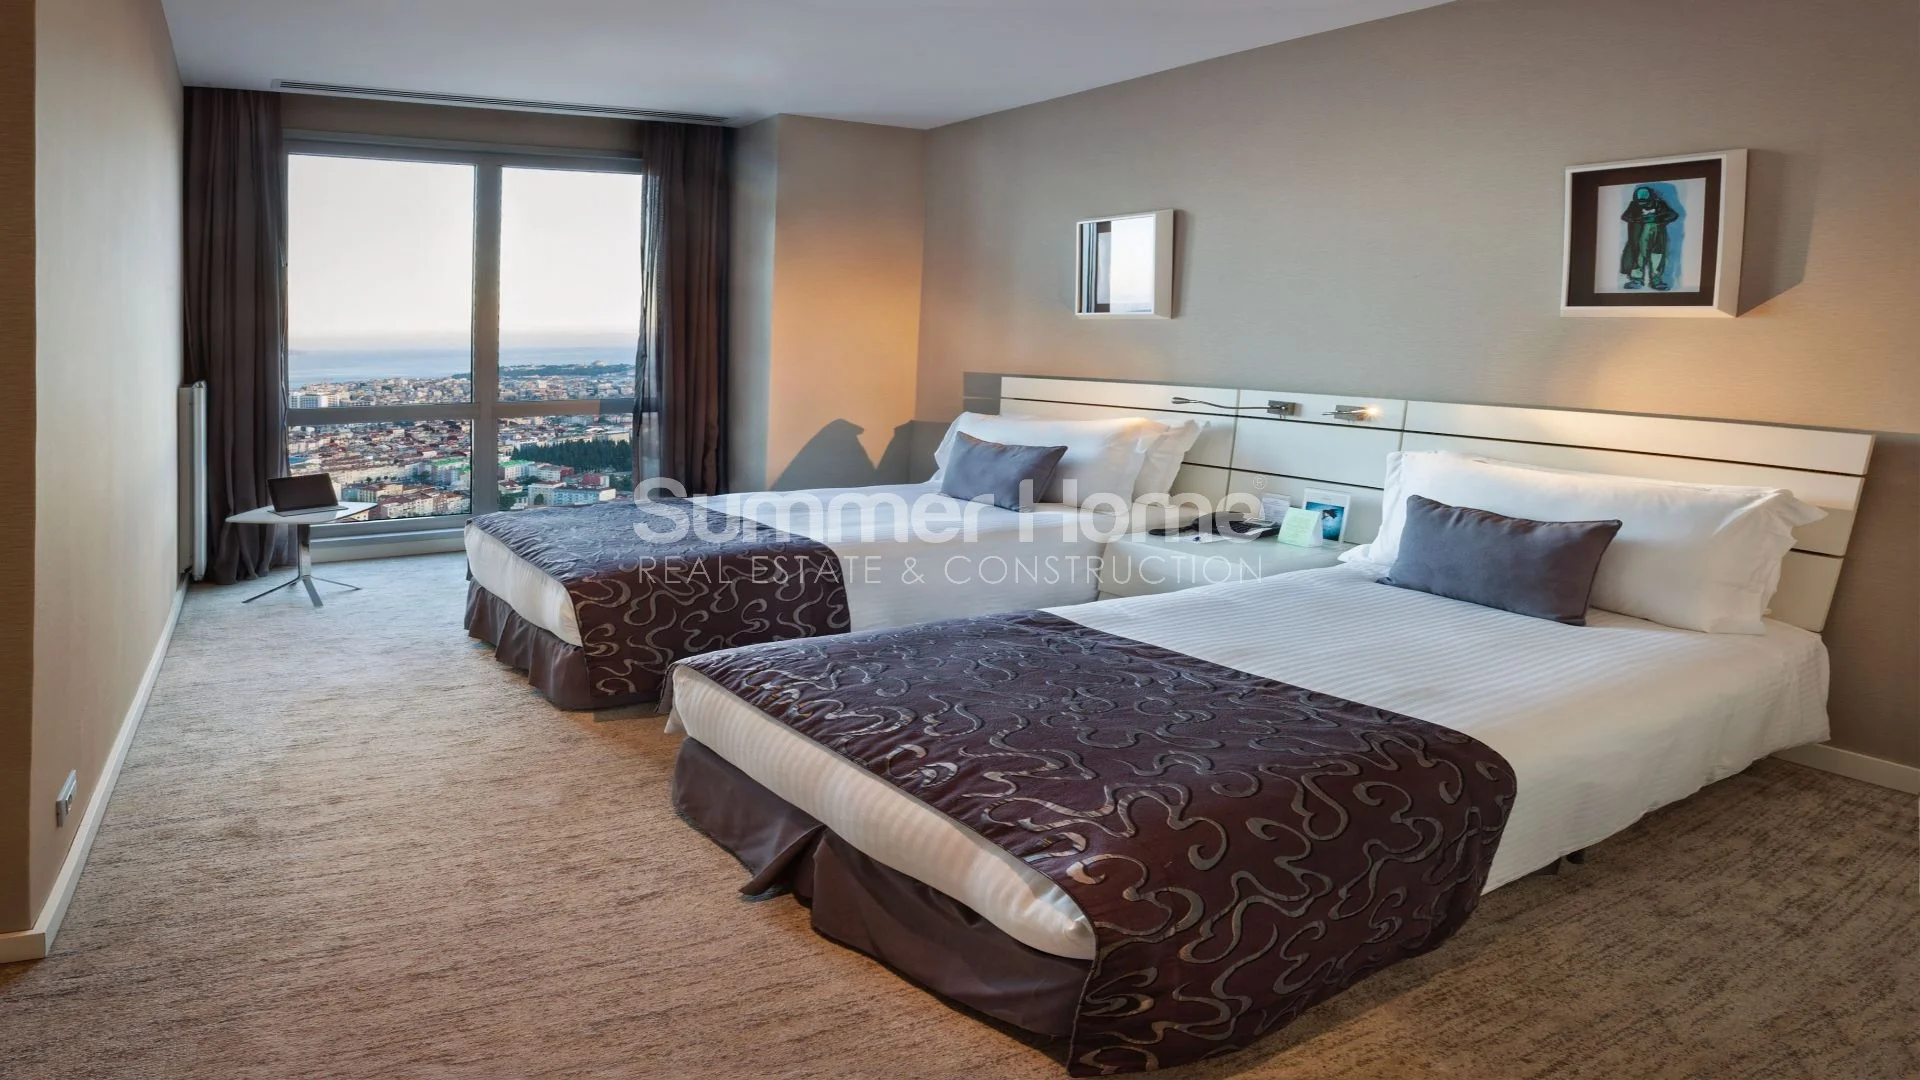 Exceptional apartments in Sisli district of Istanbul Interior - 9